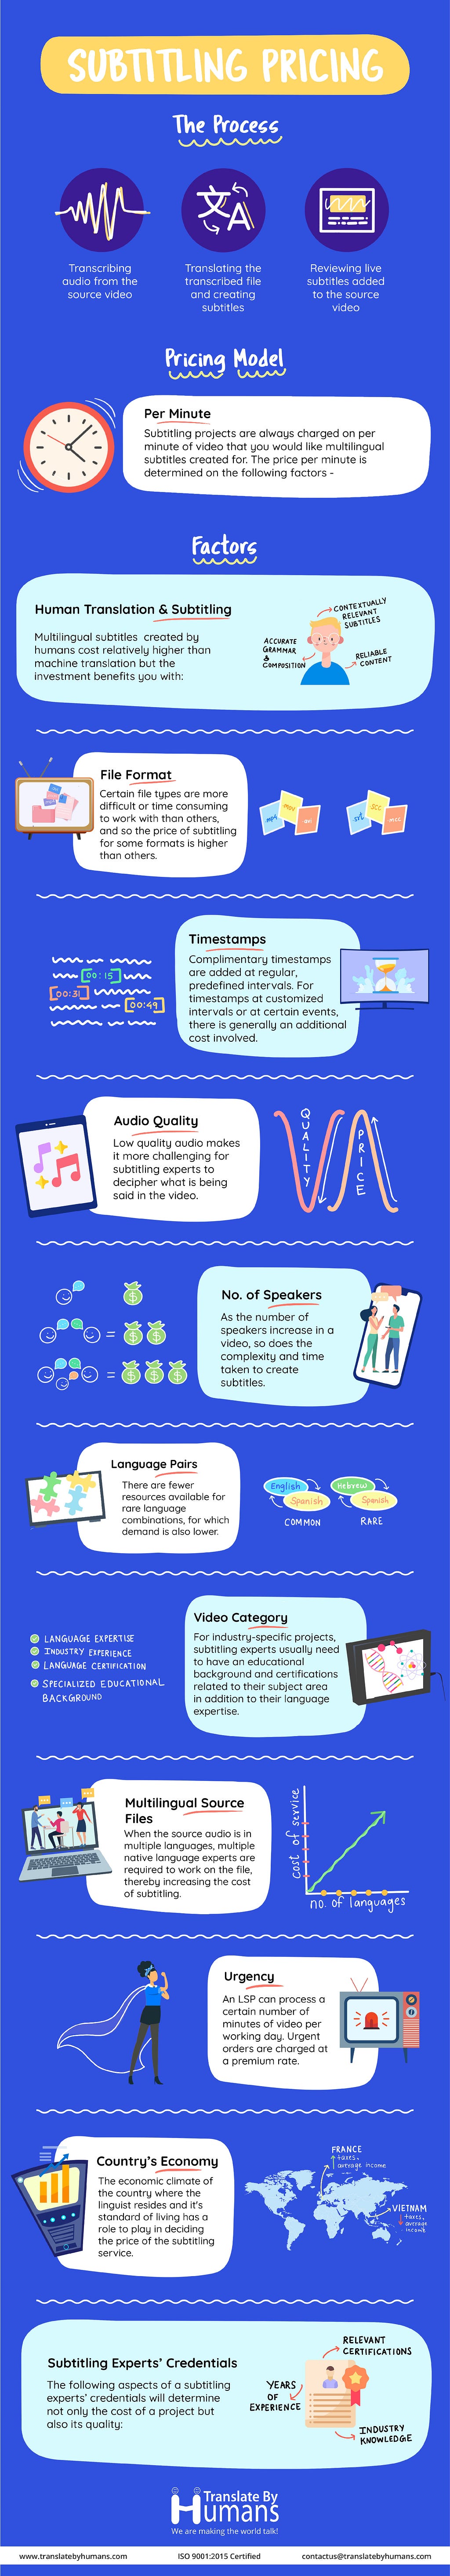 subtitling pricing infographic